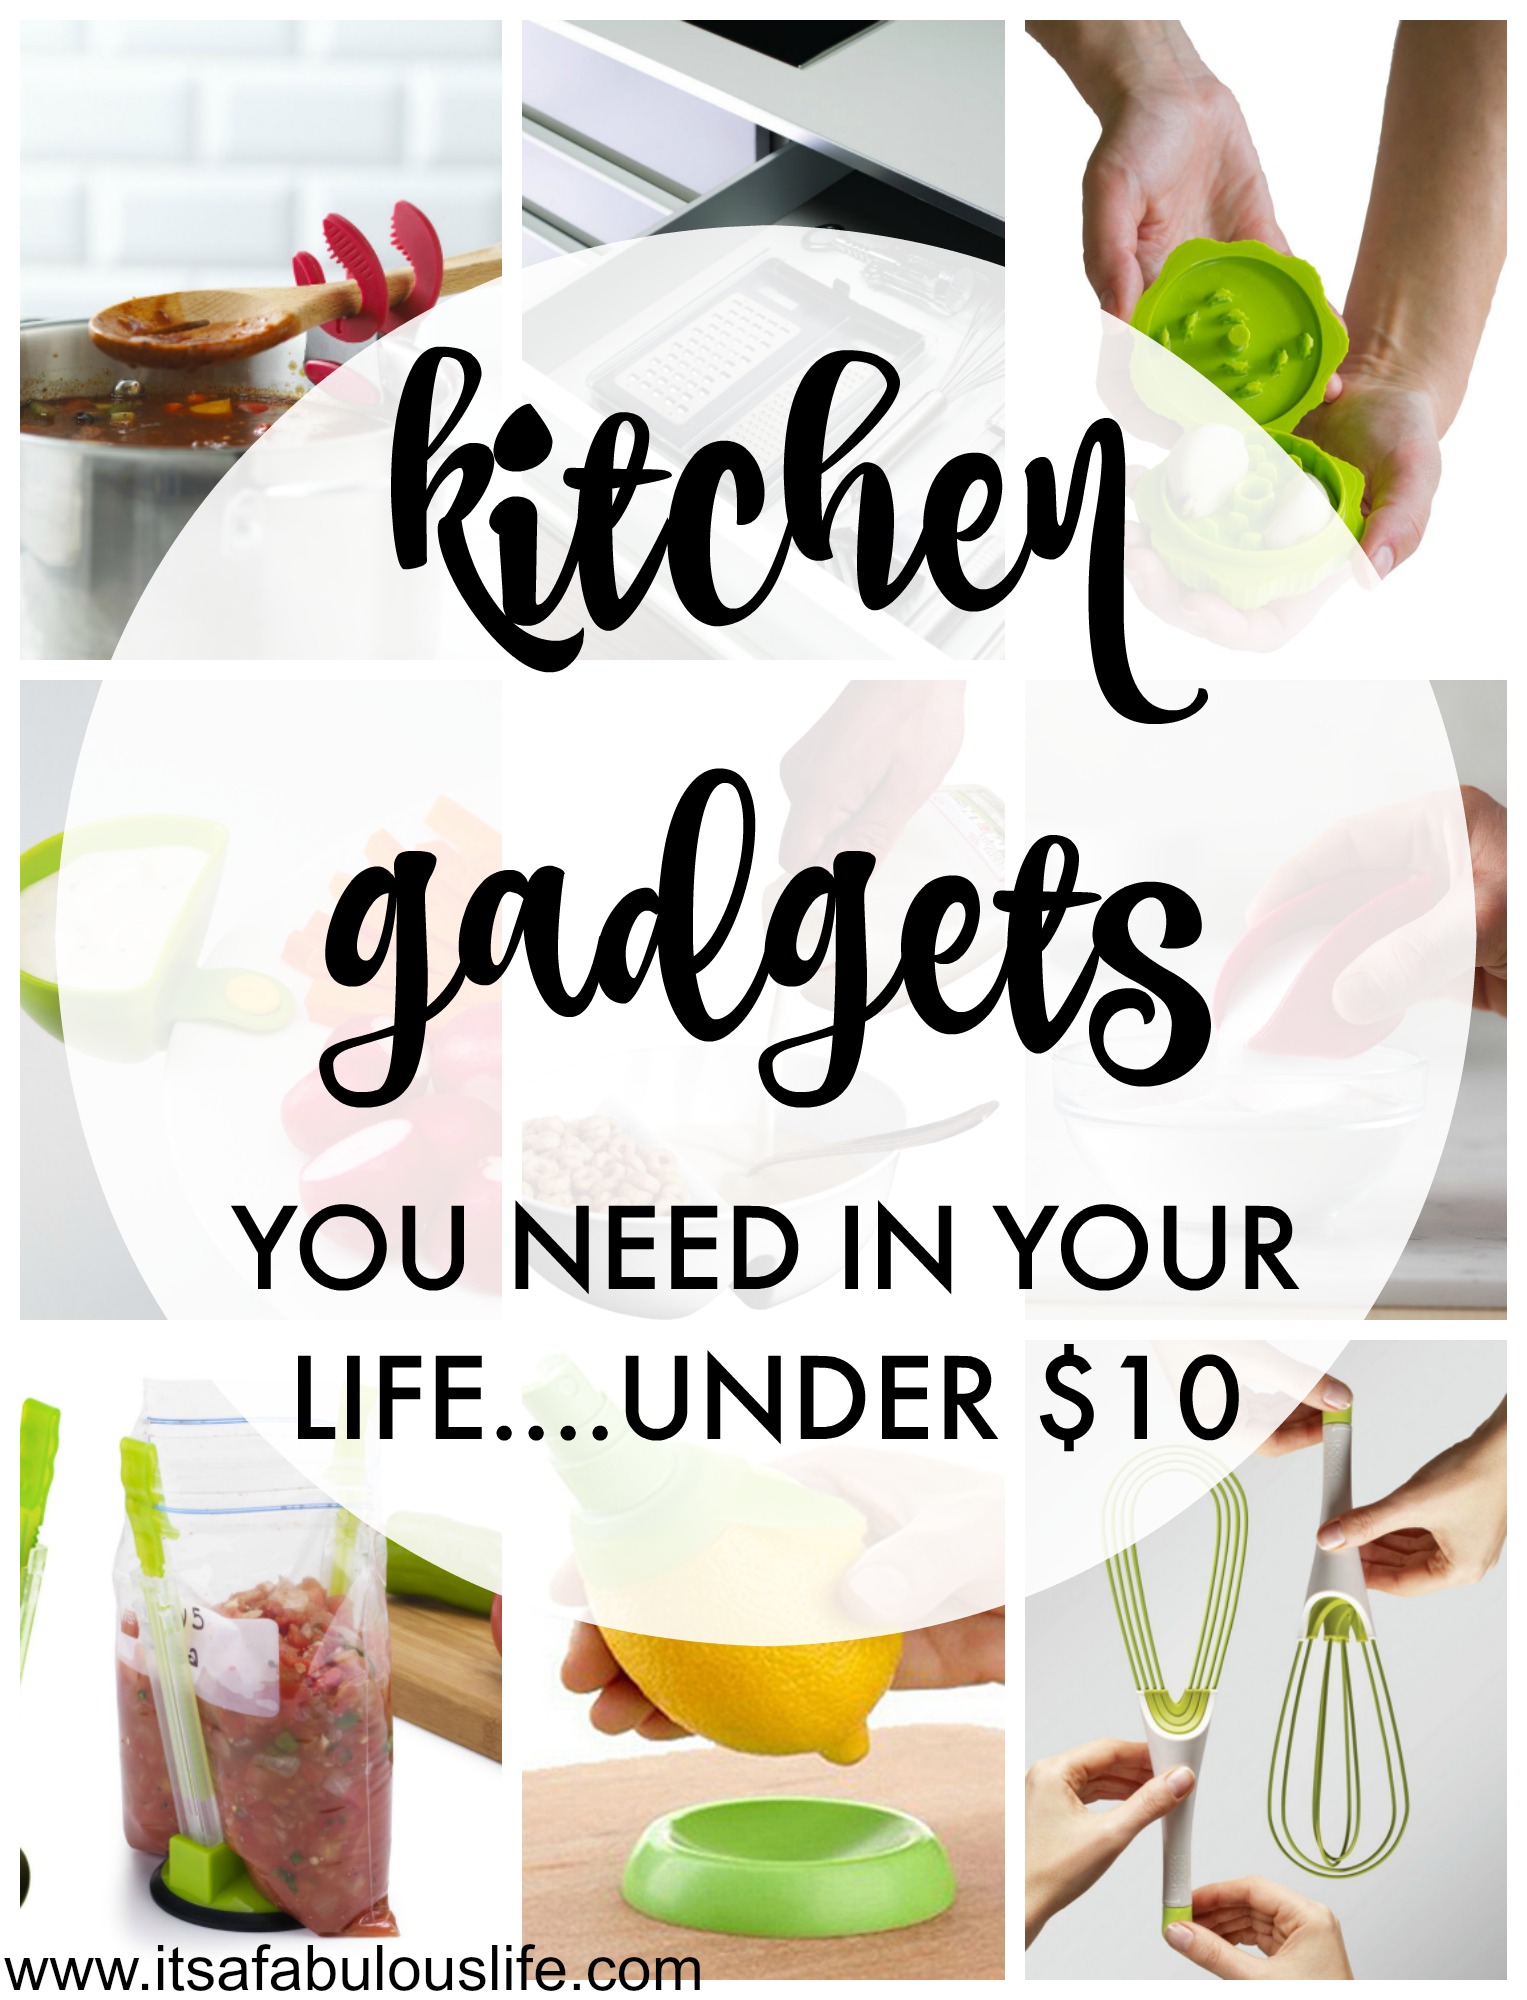 Kitchen Gadgets You Need In Your Life...Under $10